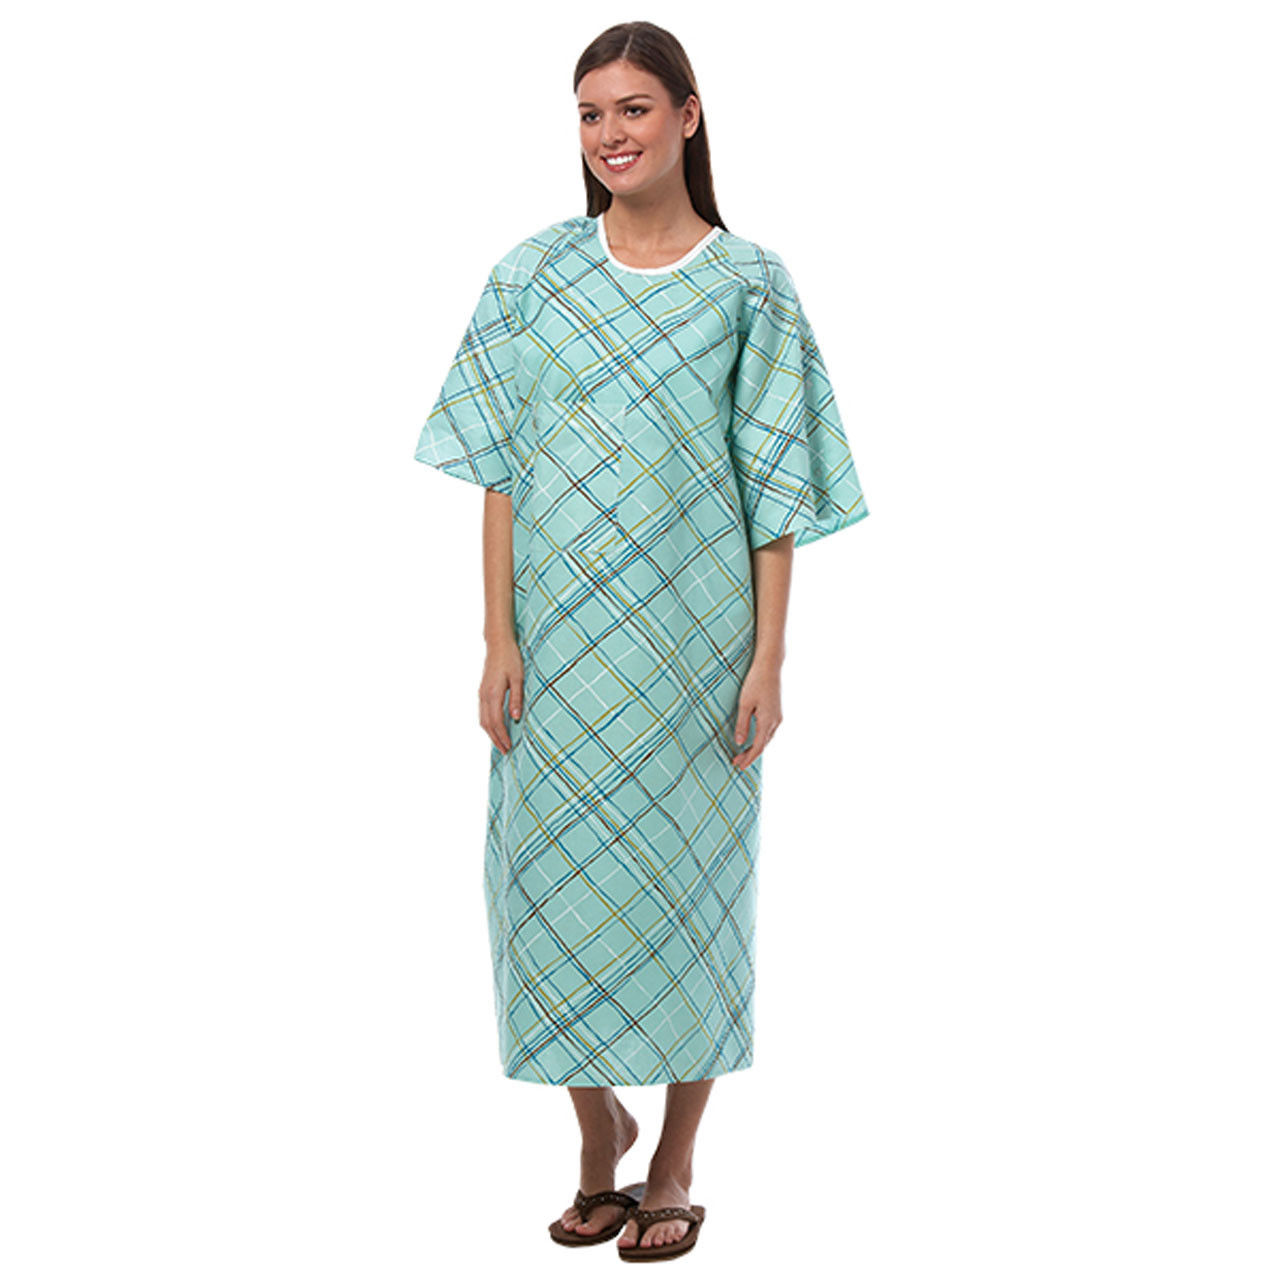 Before buying, how many comfortable patient gowns are in a case?